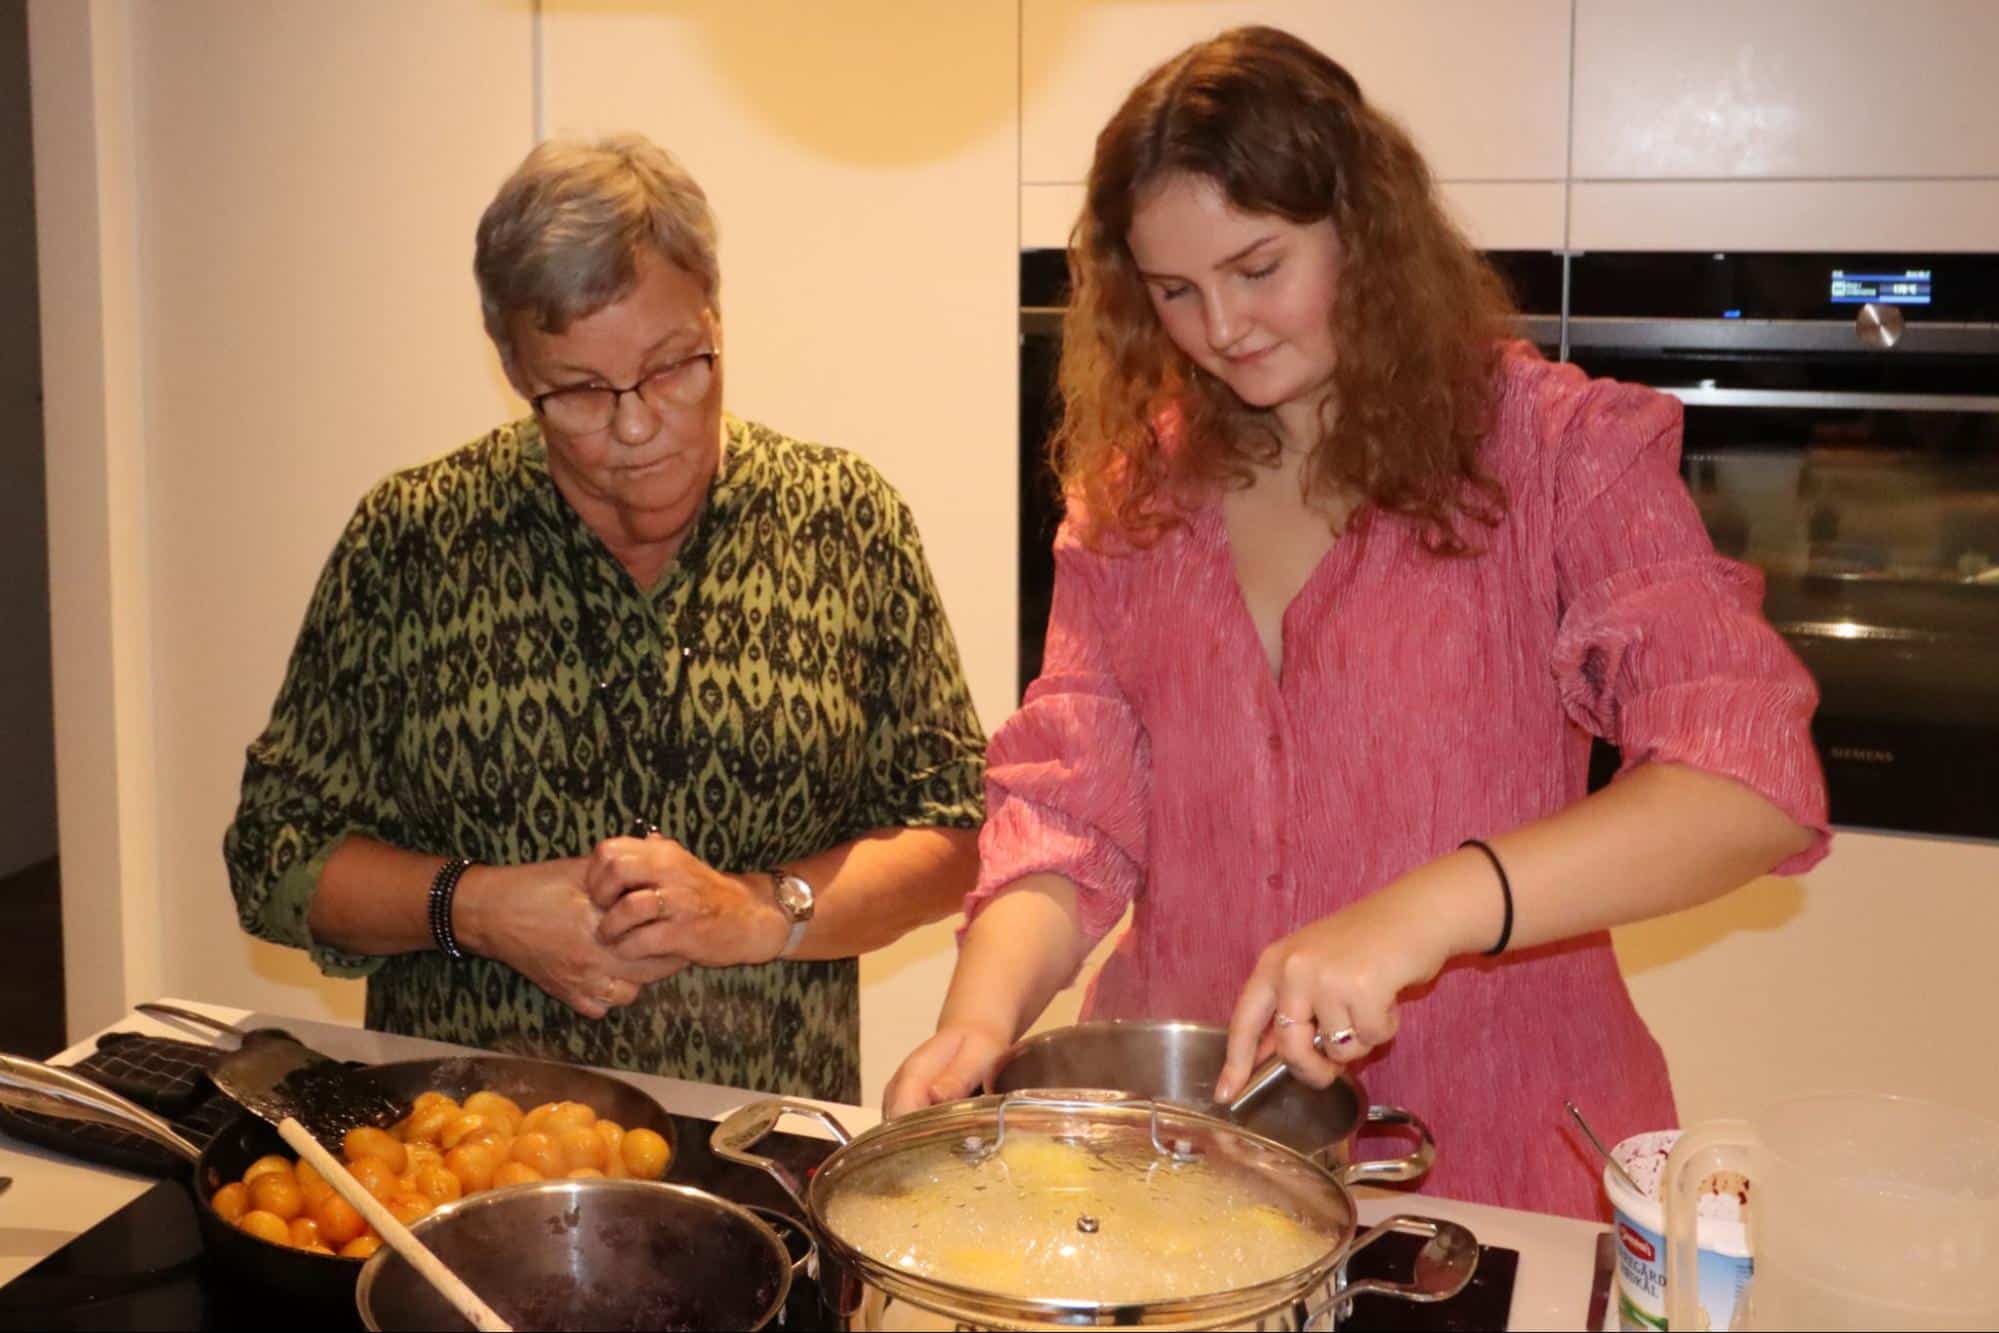 Anne and Emilie preparing Christmas dinner together this year